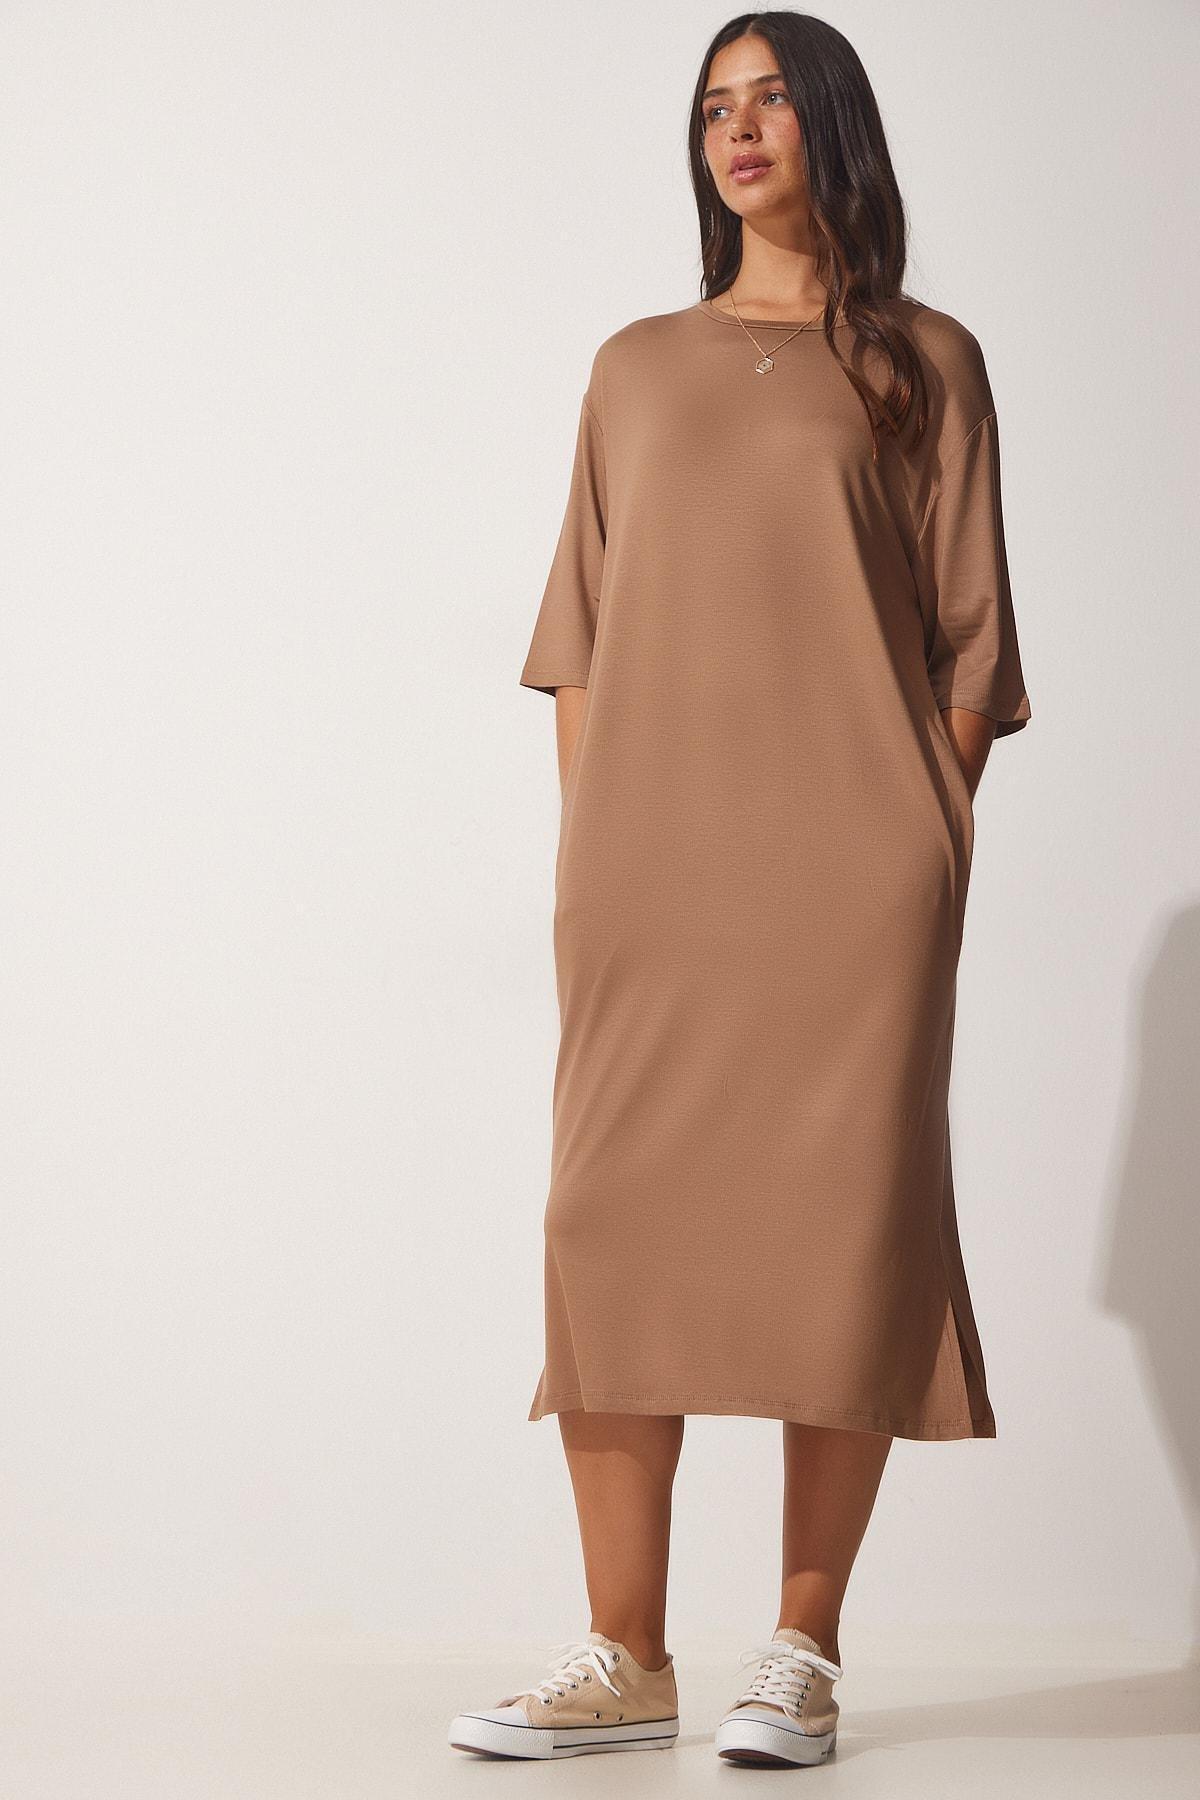 Happiness Istanbul - Brown Daily Viscose Knitted Dress